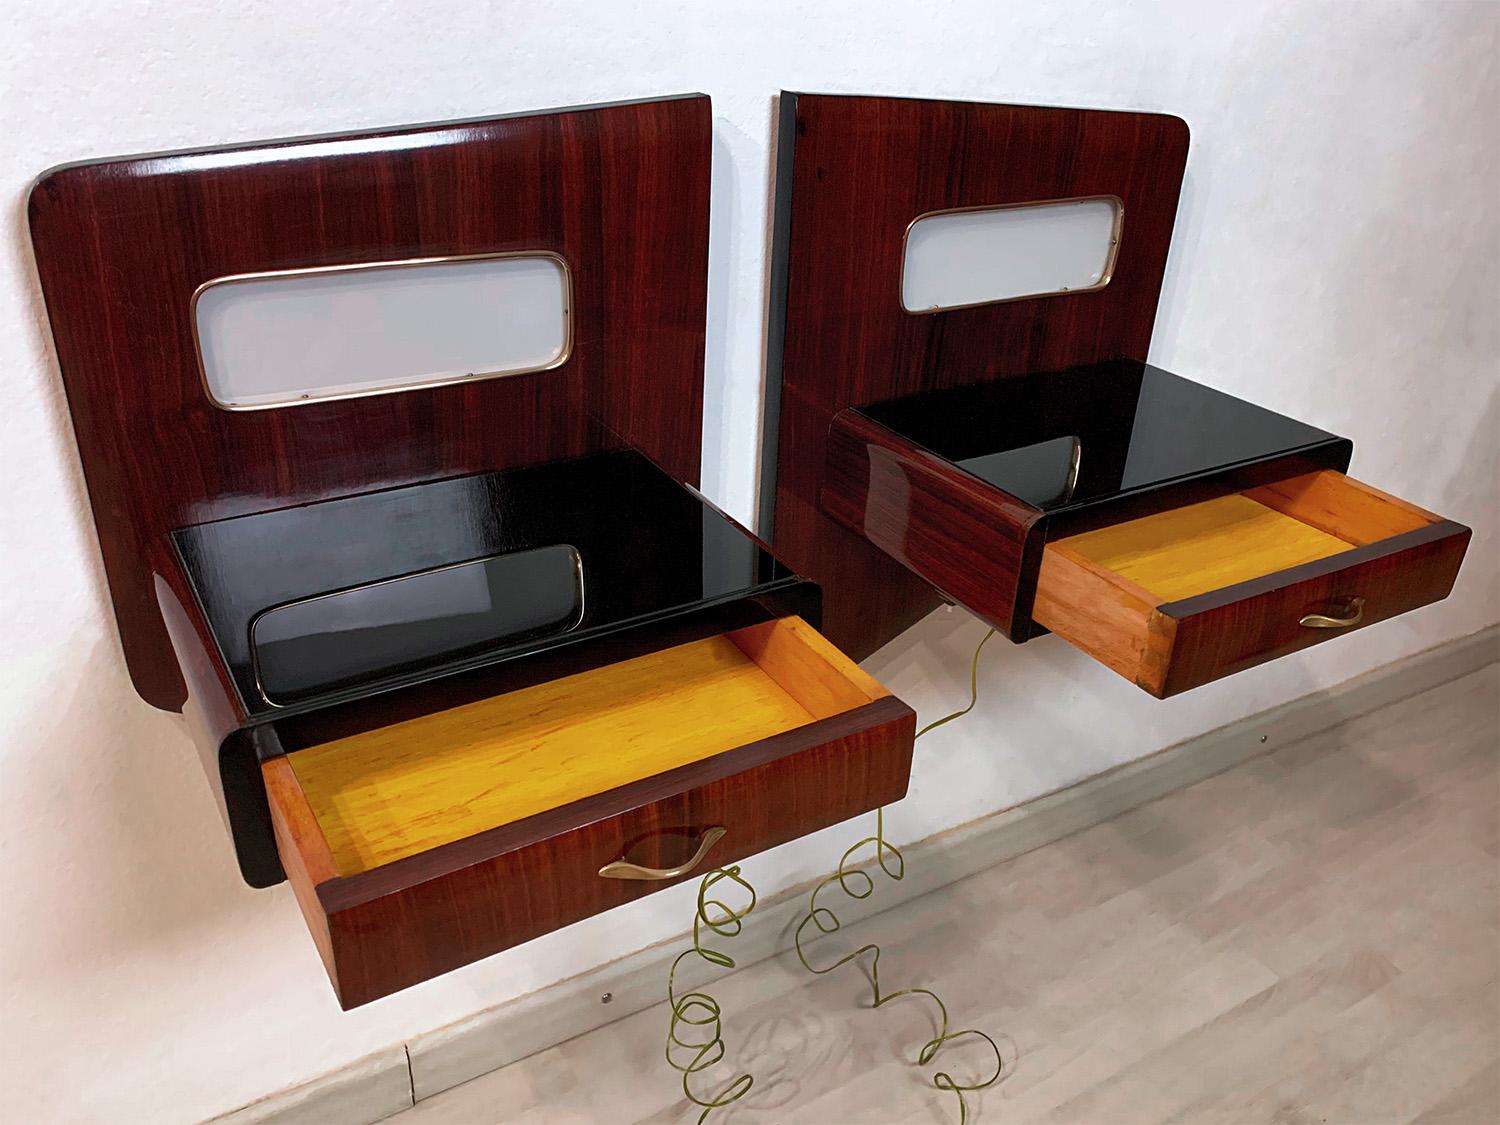 20th Century Pair of Italian Mid-Century Suspended Nightstands with Lights by Dassi, 1950s